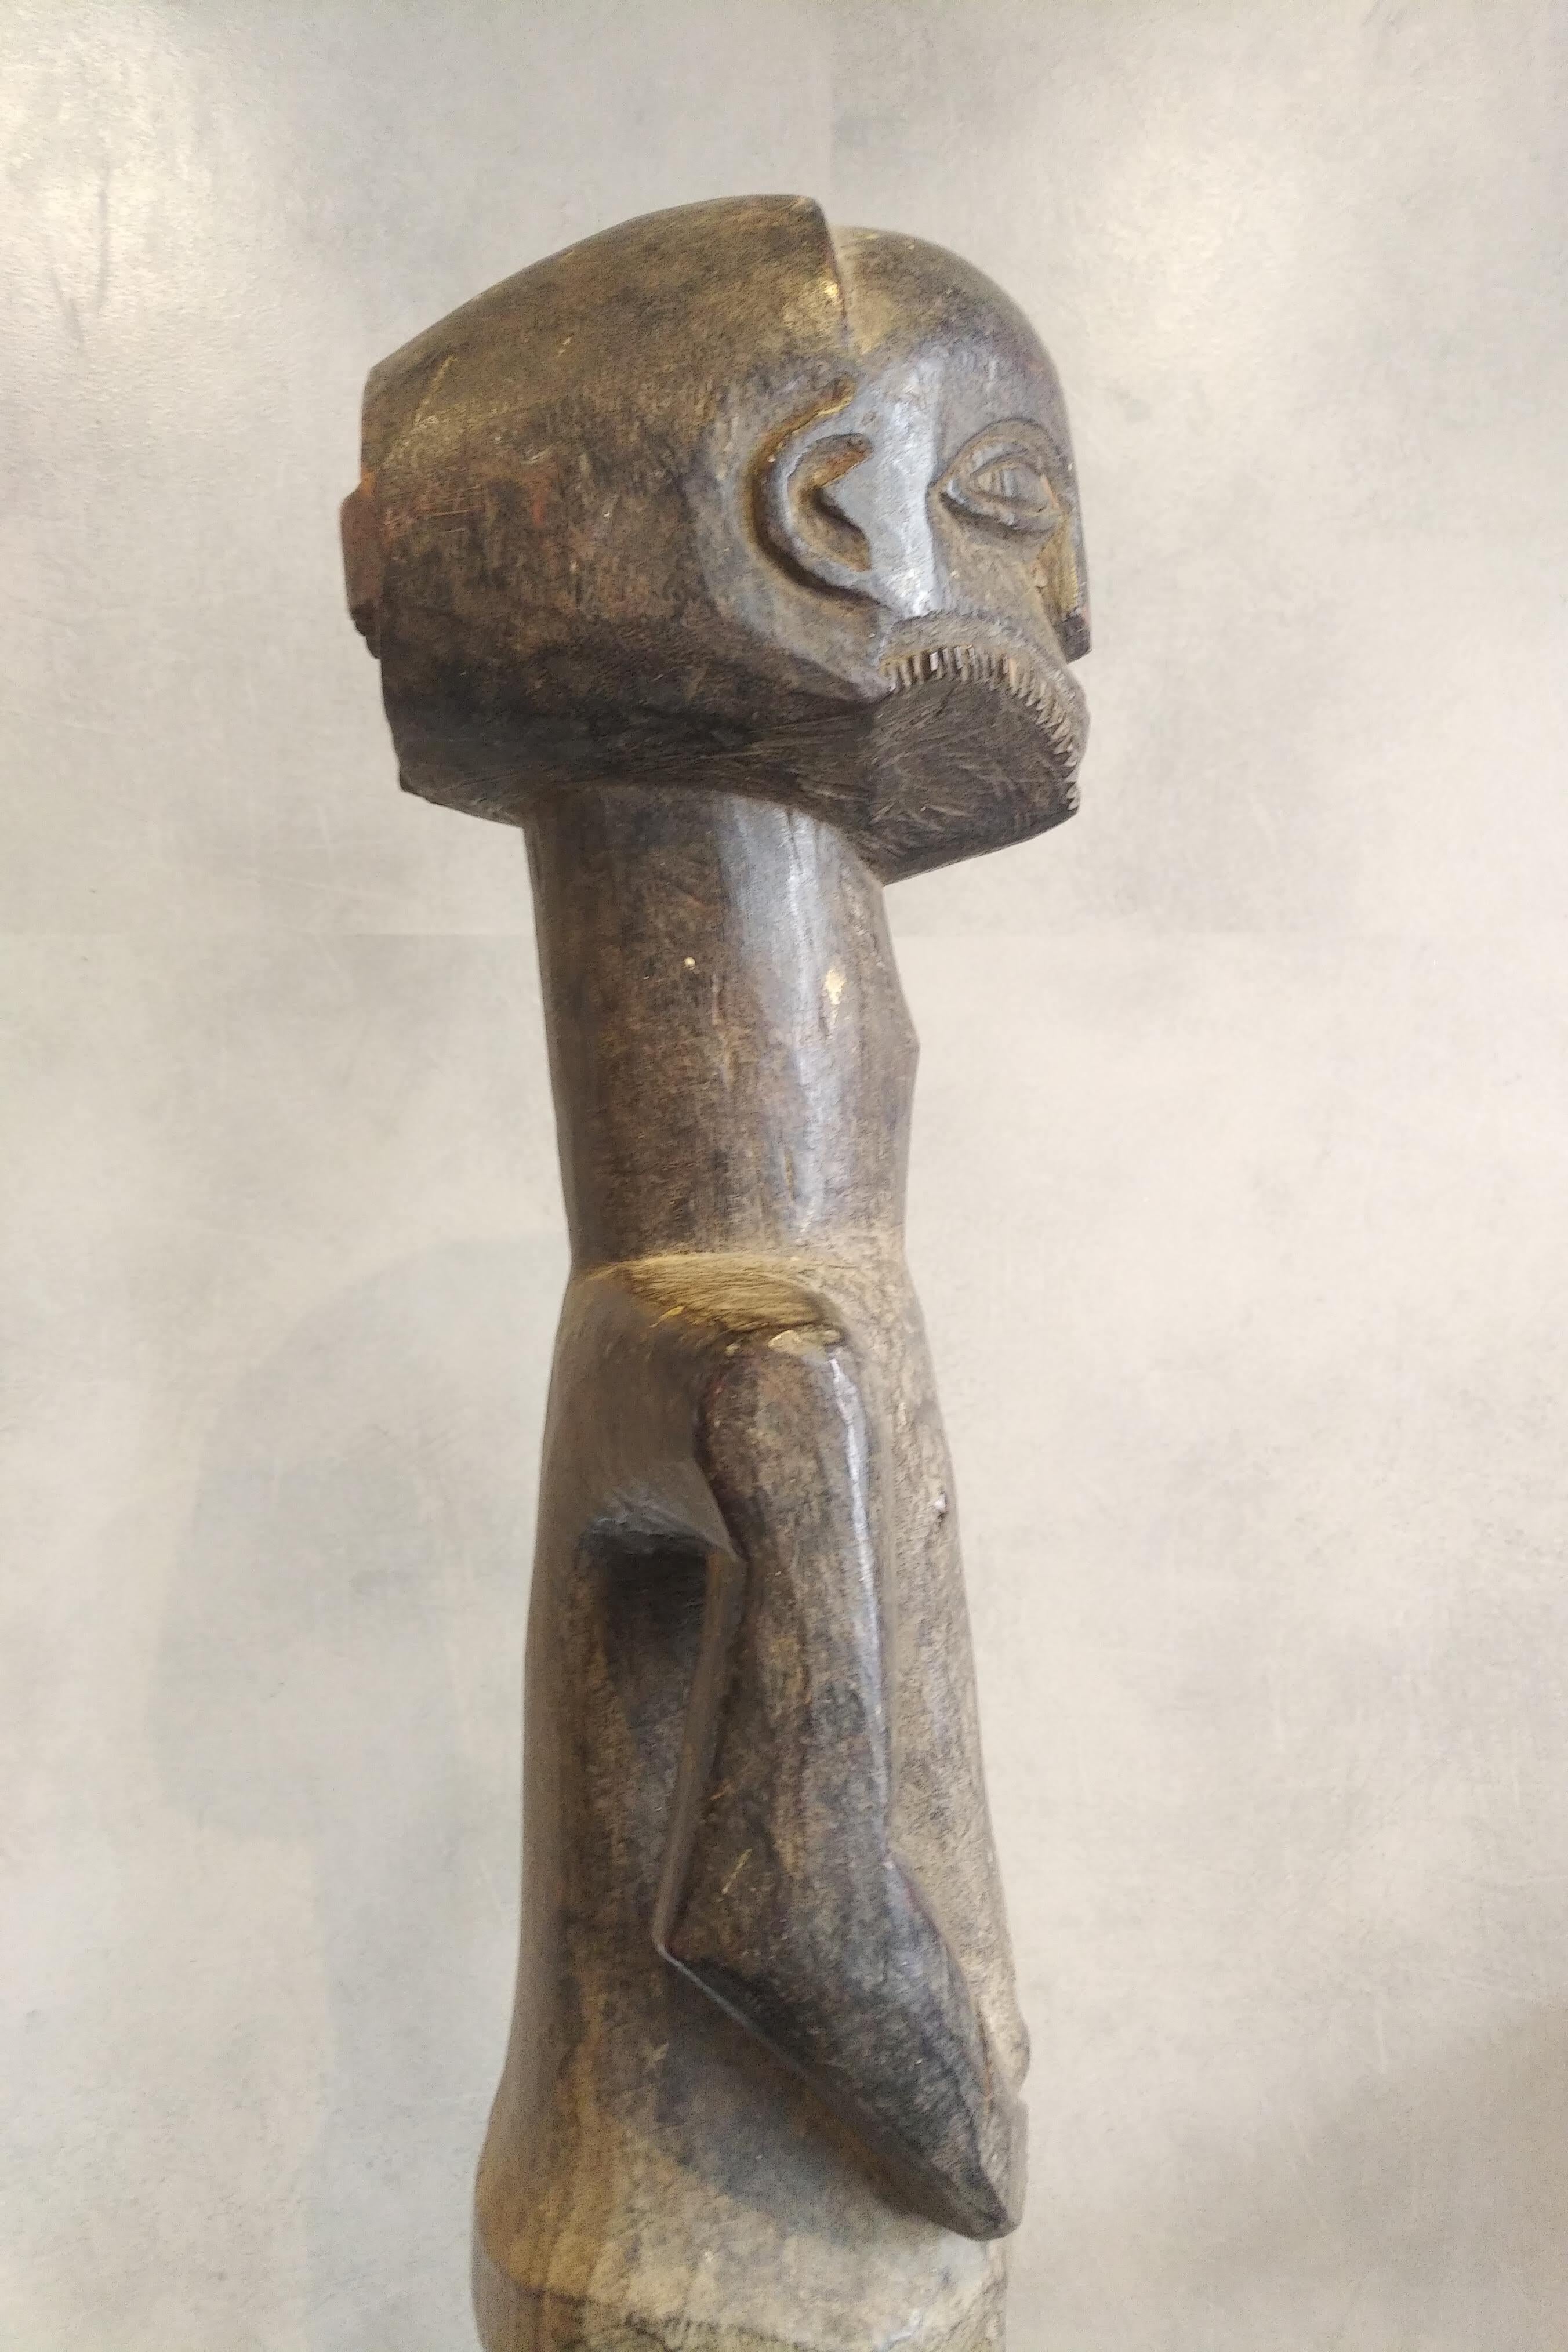 
Beautiful old sculpture representative of the Niembo corpus among the Hemba,
Hardwood, patina of dark use.
Very old statue of a standing male figure representing a chief, he is standing hands on hips, short legs and broad shoulders. The body is